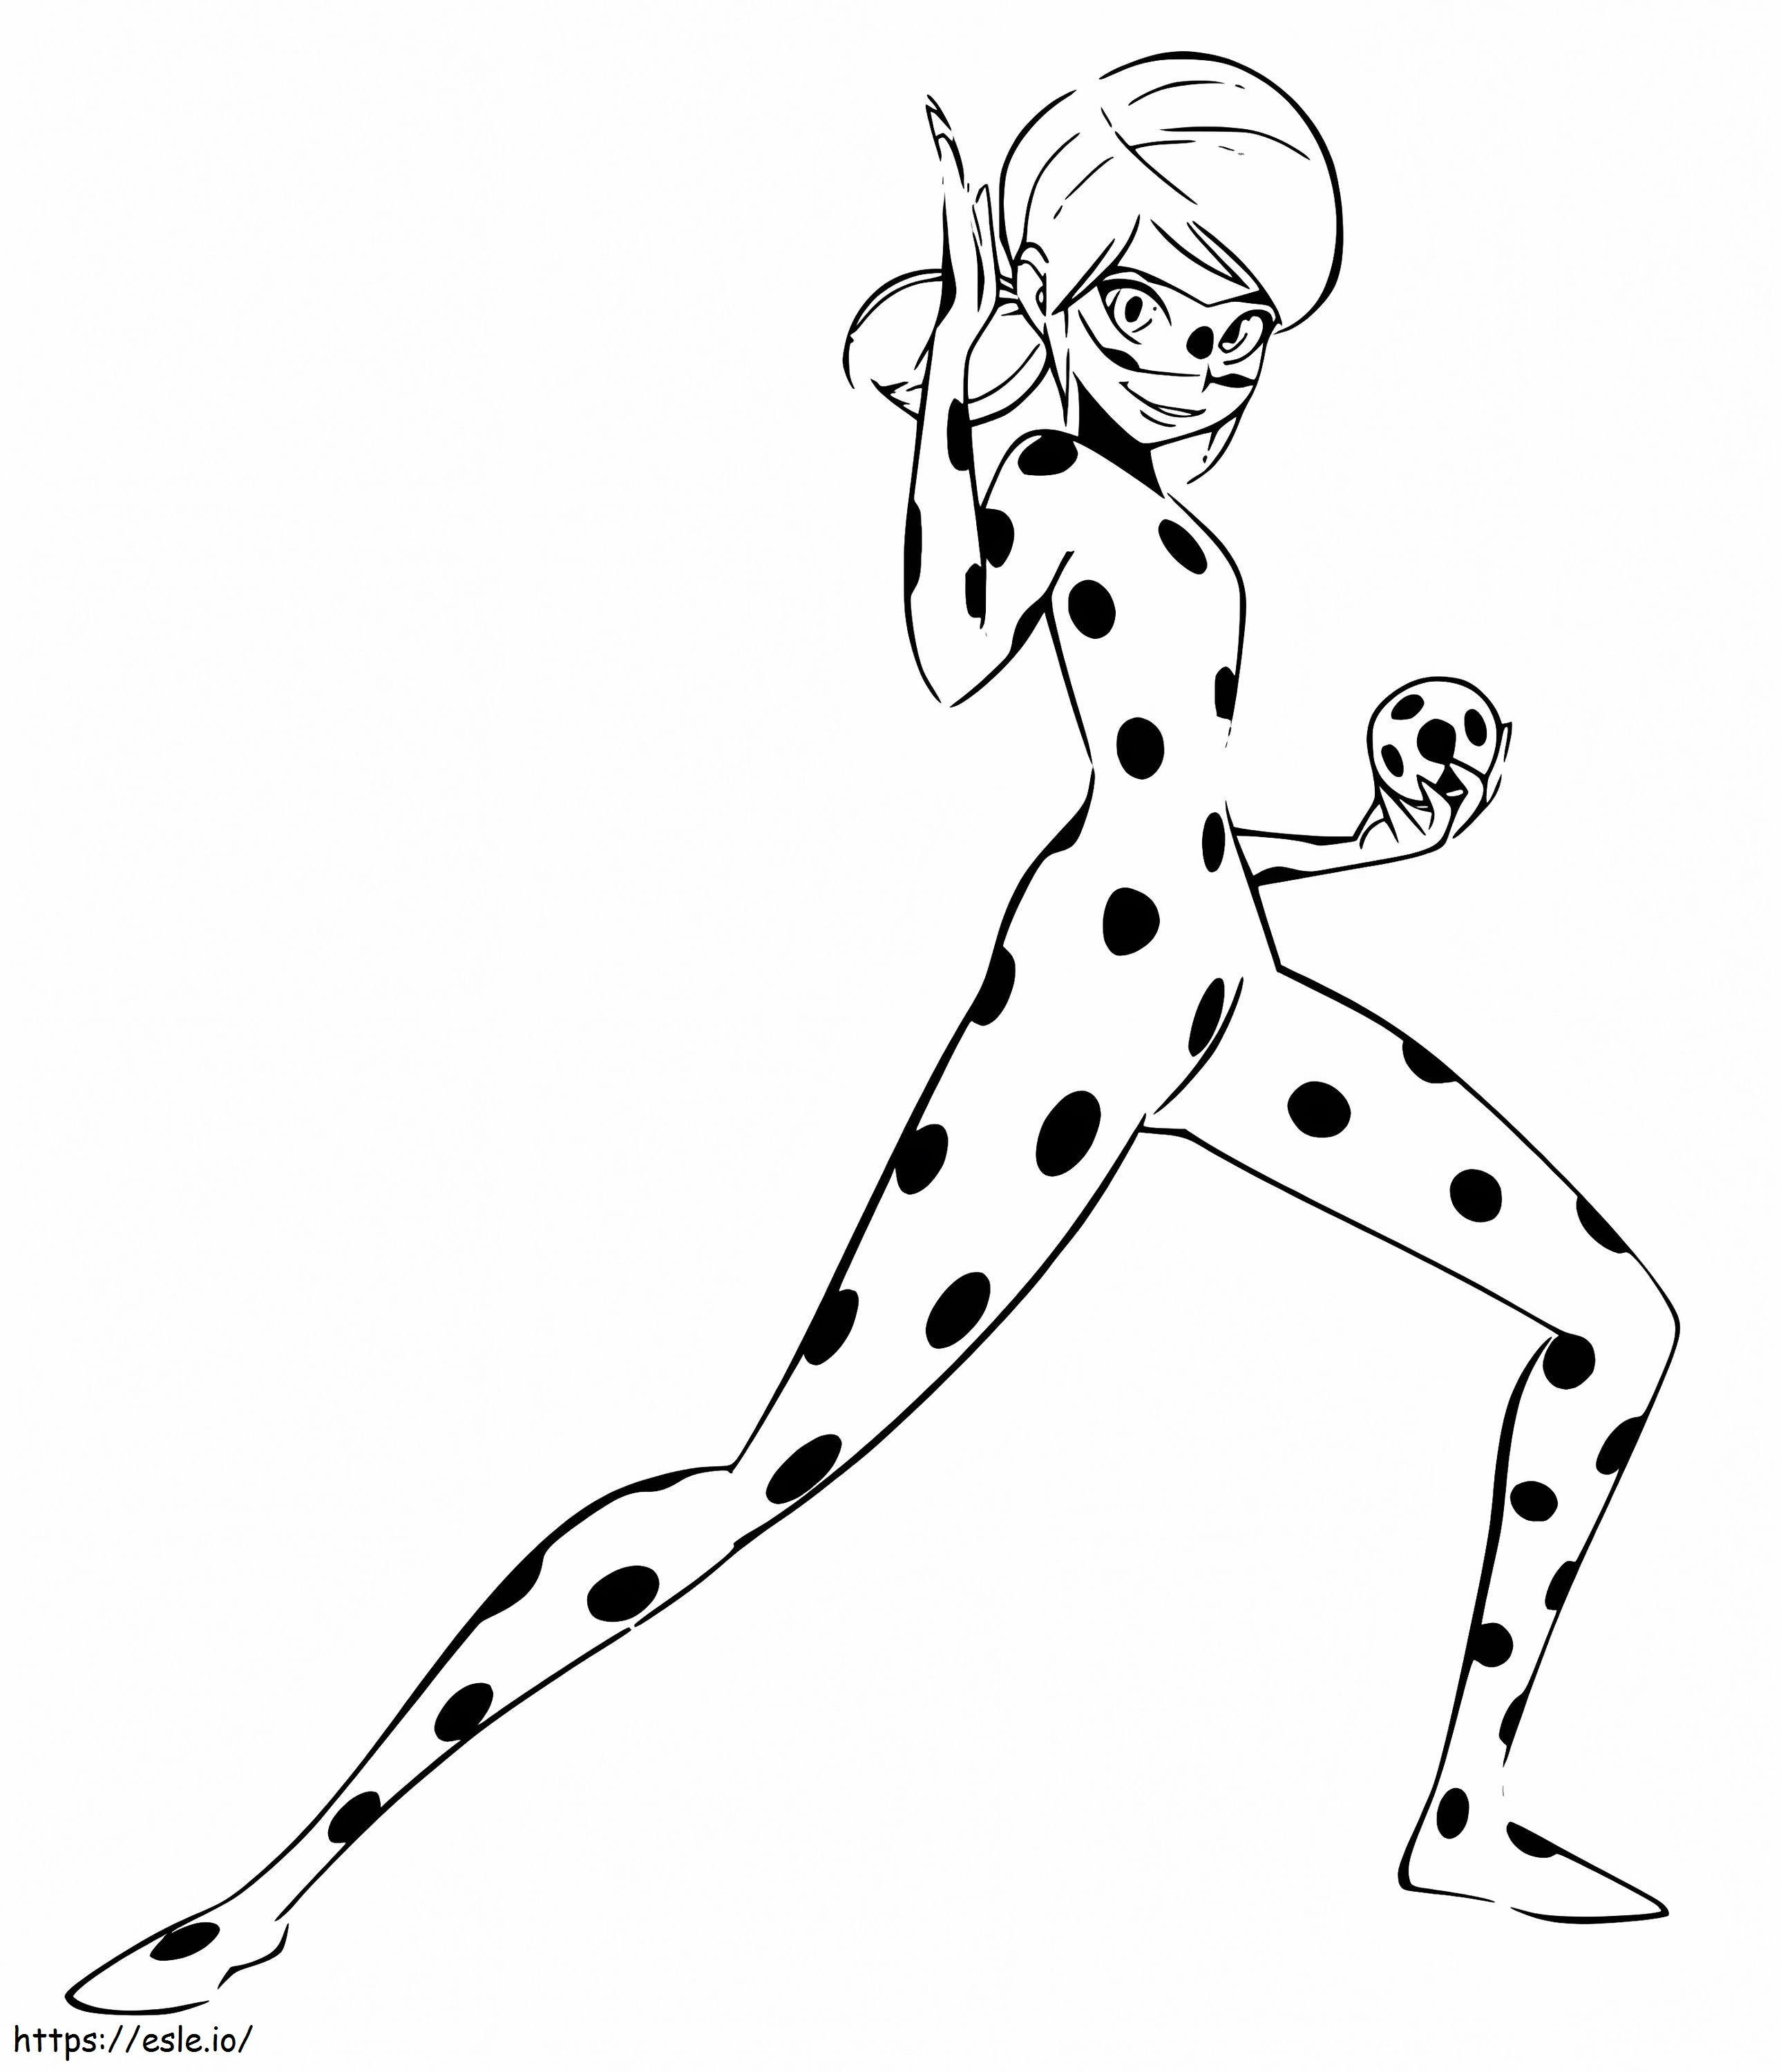 Awesome Miraculous Ladybug coloring page